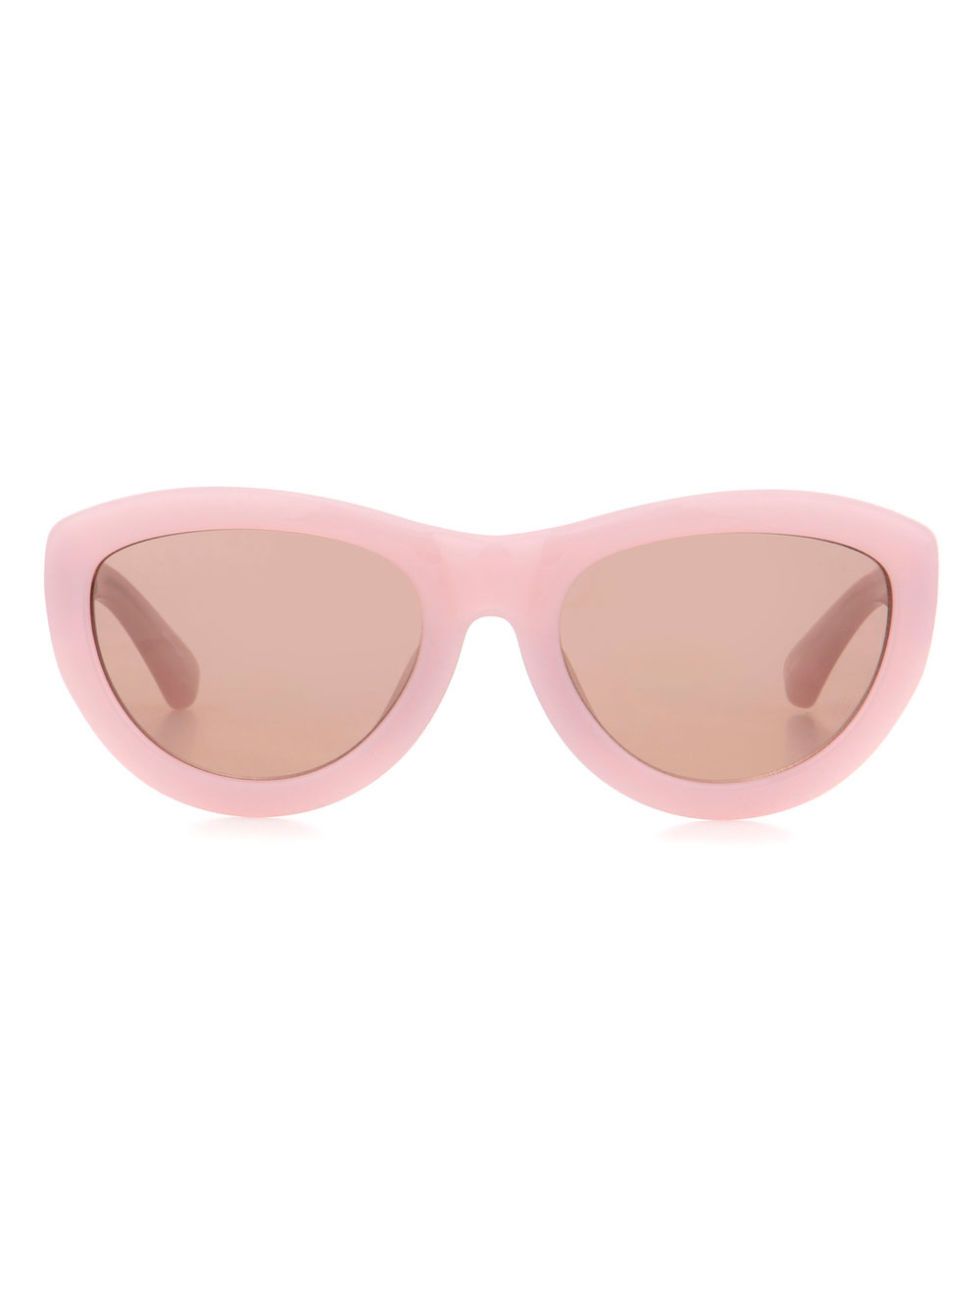 Eyewear, Sunglasses, Glasses, Pink, Personal protective equipment, Vision care, Brown, aviator sunglass, Goggles, Material property, 